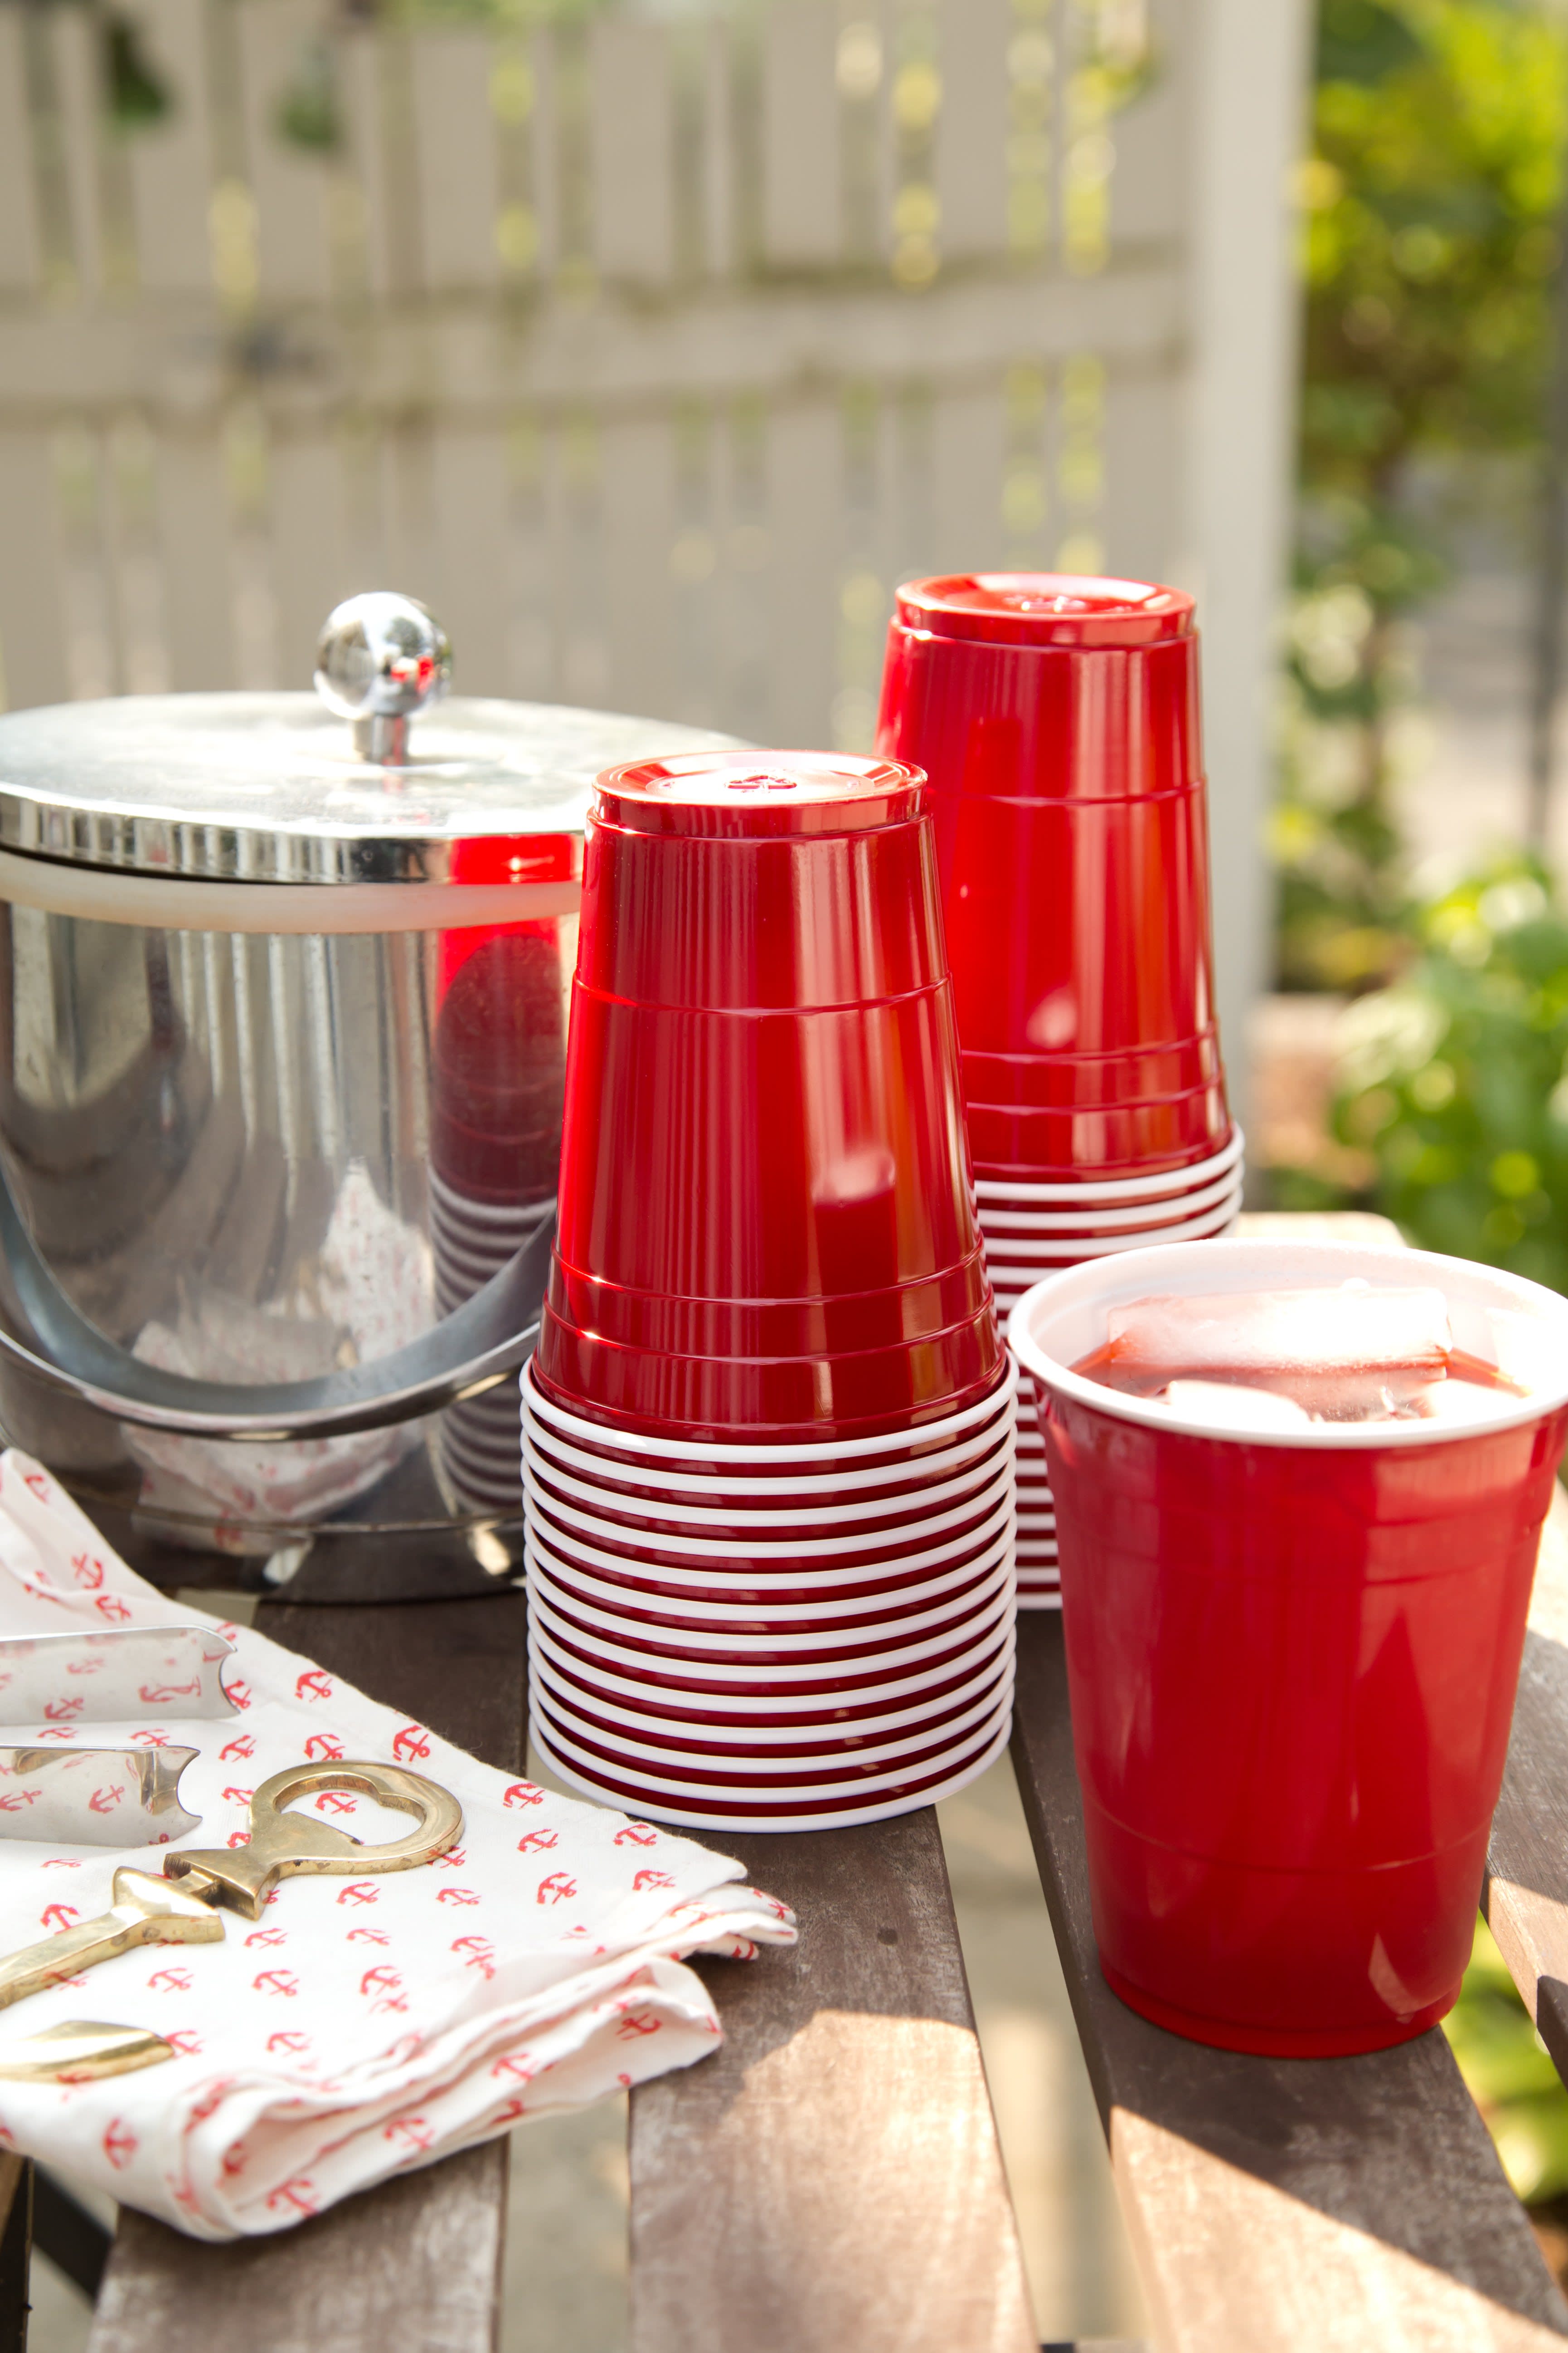 Here's Why There Are Lines On The Solo Cup